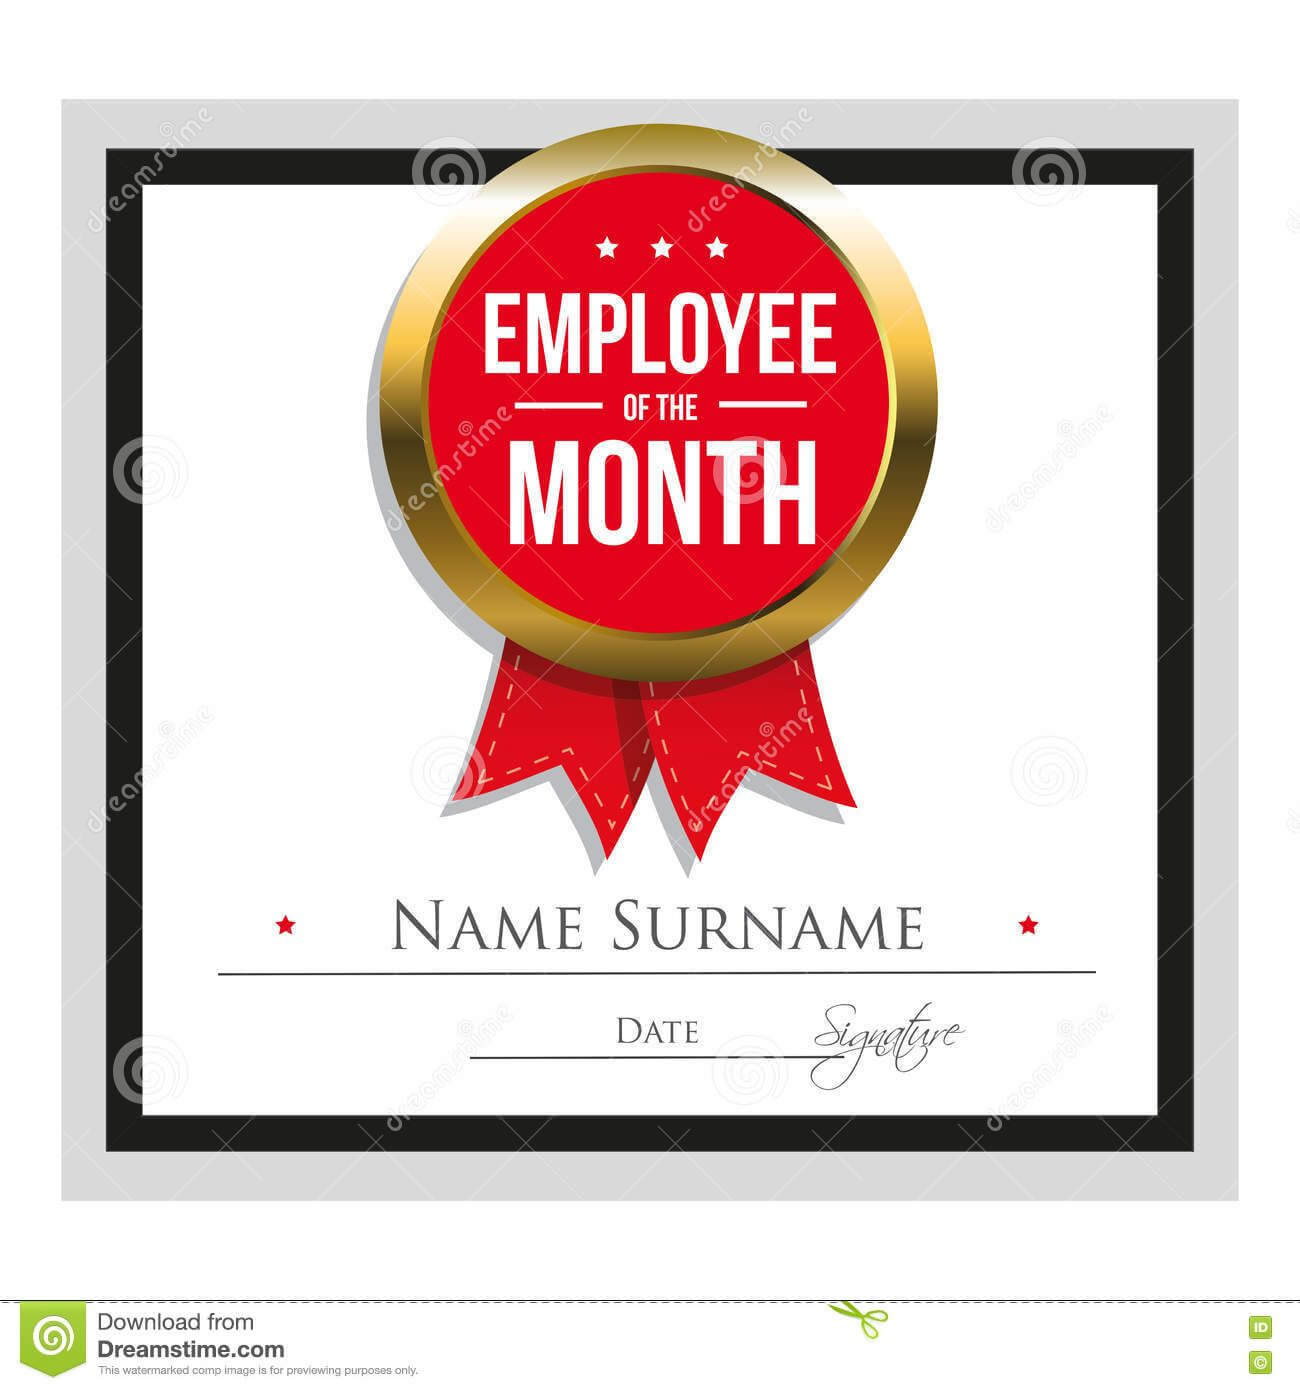 Employee Award Certificate Template Free Templates Design Intended For Employee Of The Year Certificate Template Free